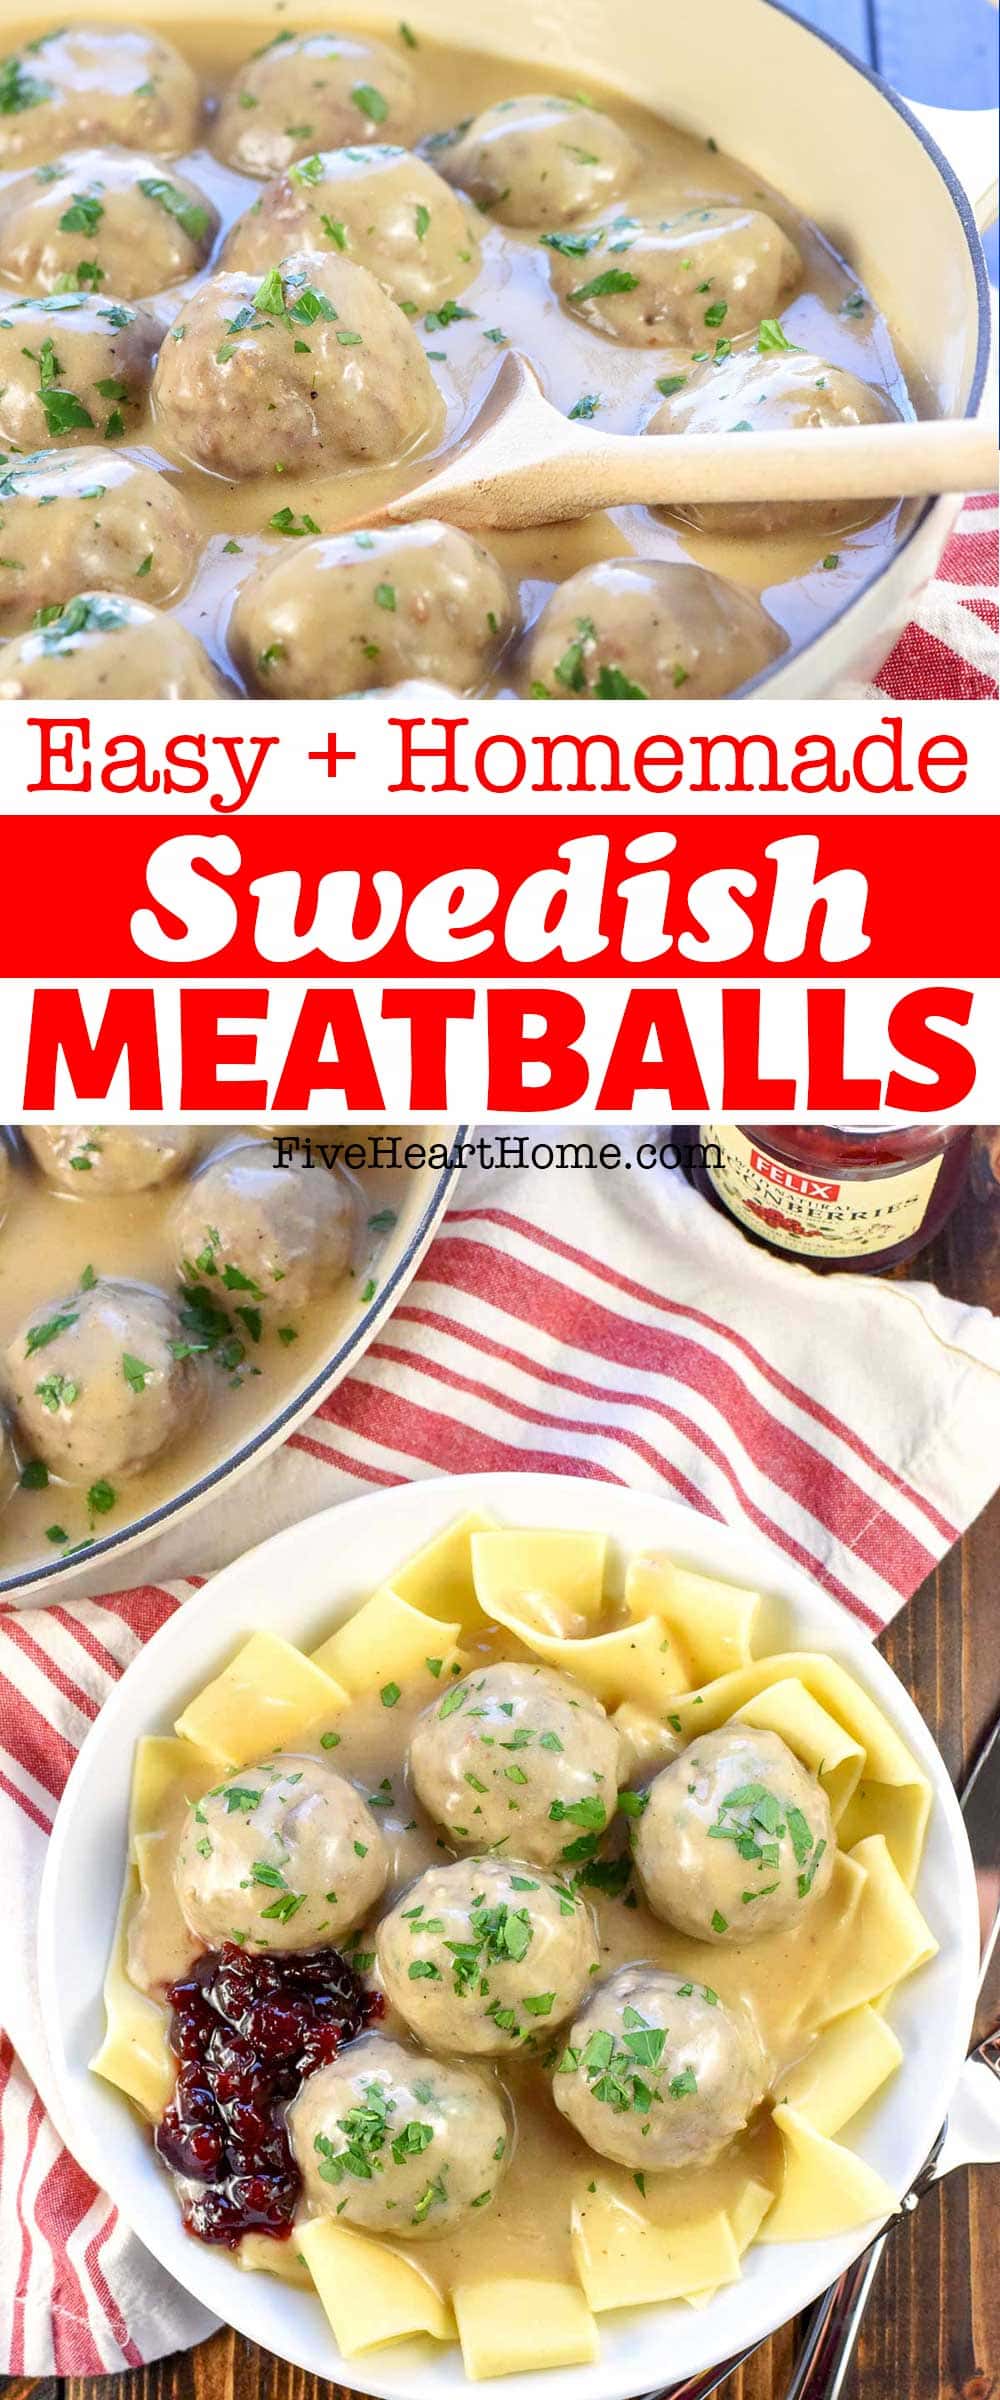 Swedish Meatballs ~ made from scratch, baked in the oven, and then simmered in a skillet of homemade sauce. Served over noodles or mashed potatoes, smothered in Swedish meatball sauce, and garnished with parsley and a dollop of lingonberry jam, this Swedish meatball recipe is an easy, delicious, family-pleasing dinner! | FiveHeartHome.com via @fivehearthome